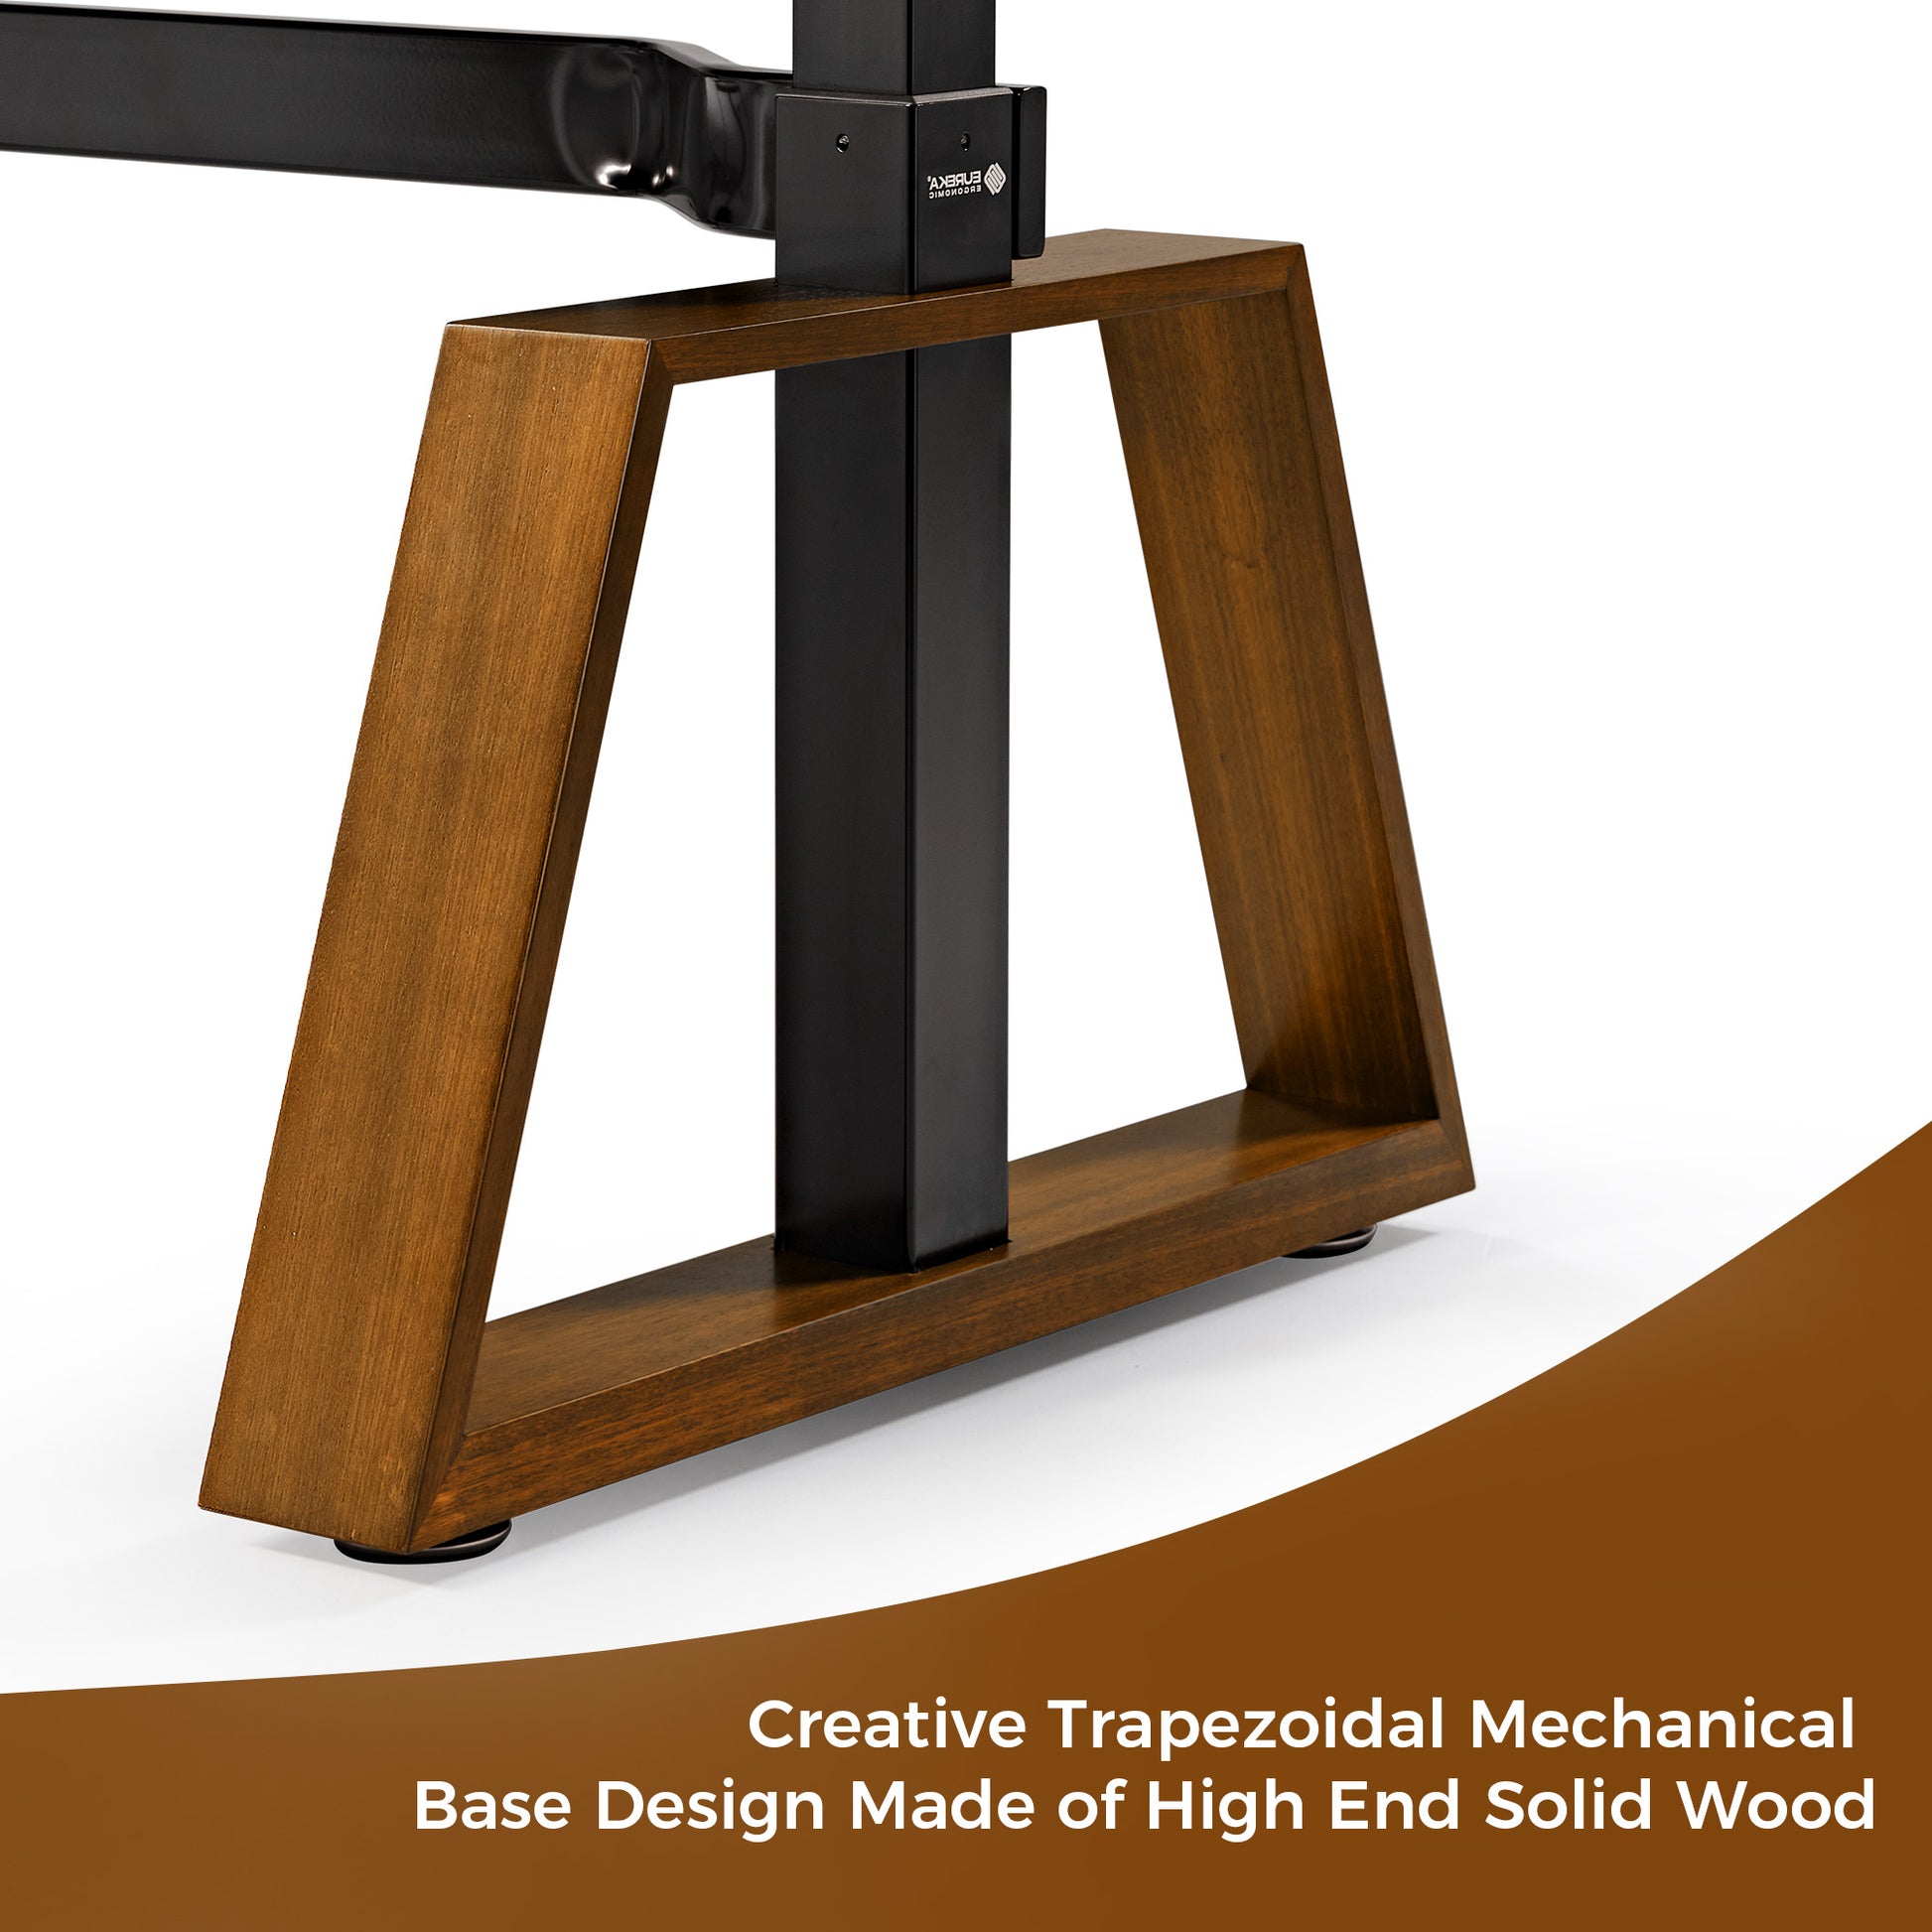 Ark L60 trapezoidal mechanical base design made of high end solid wood